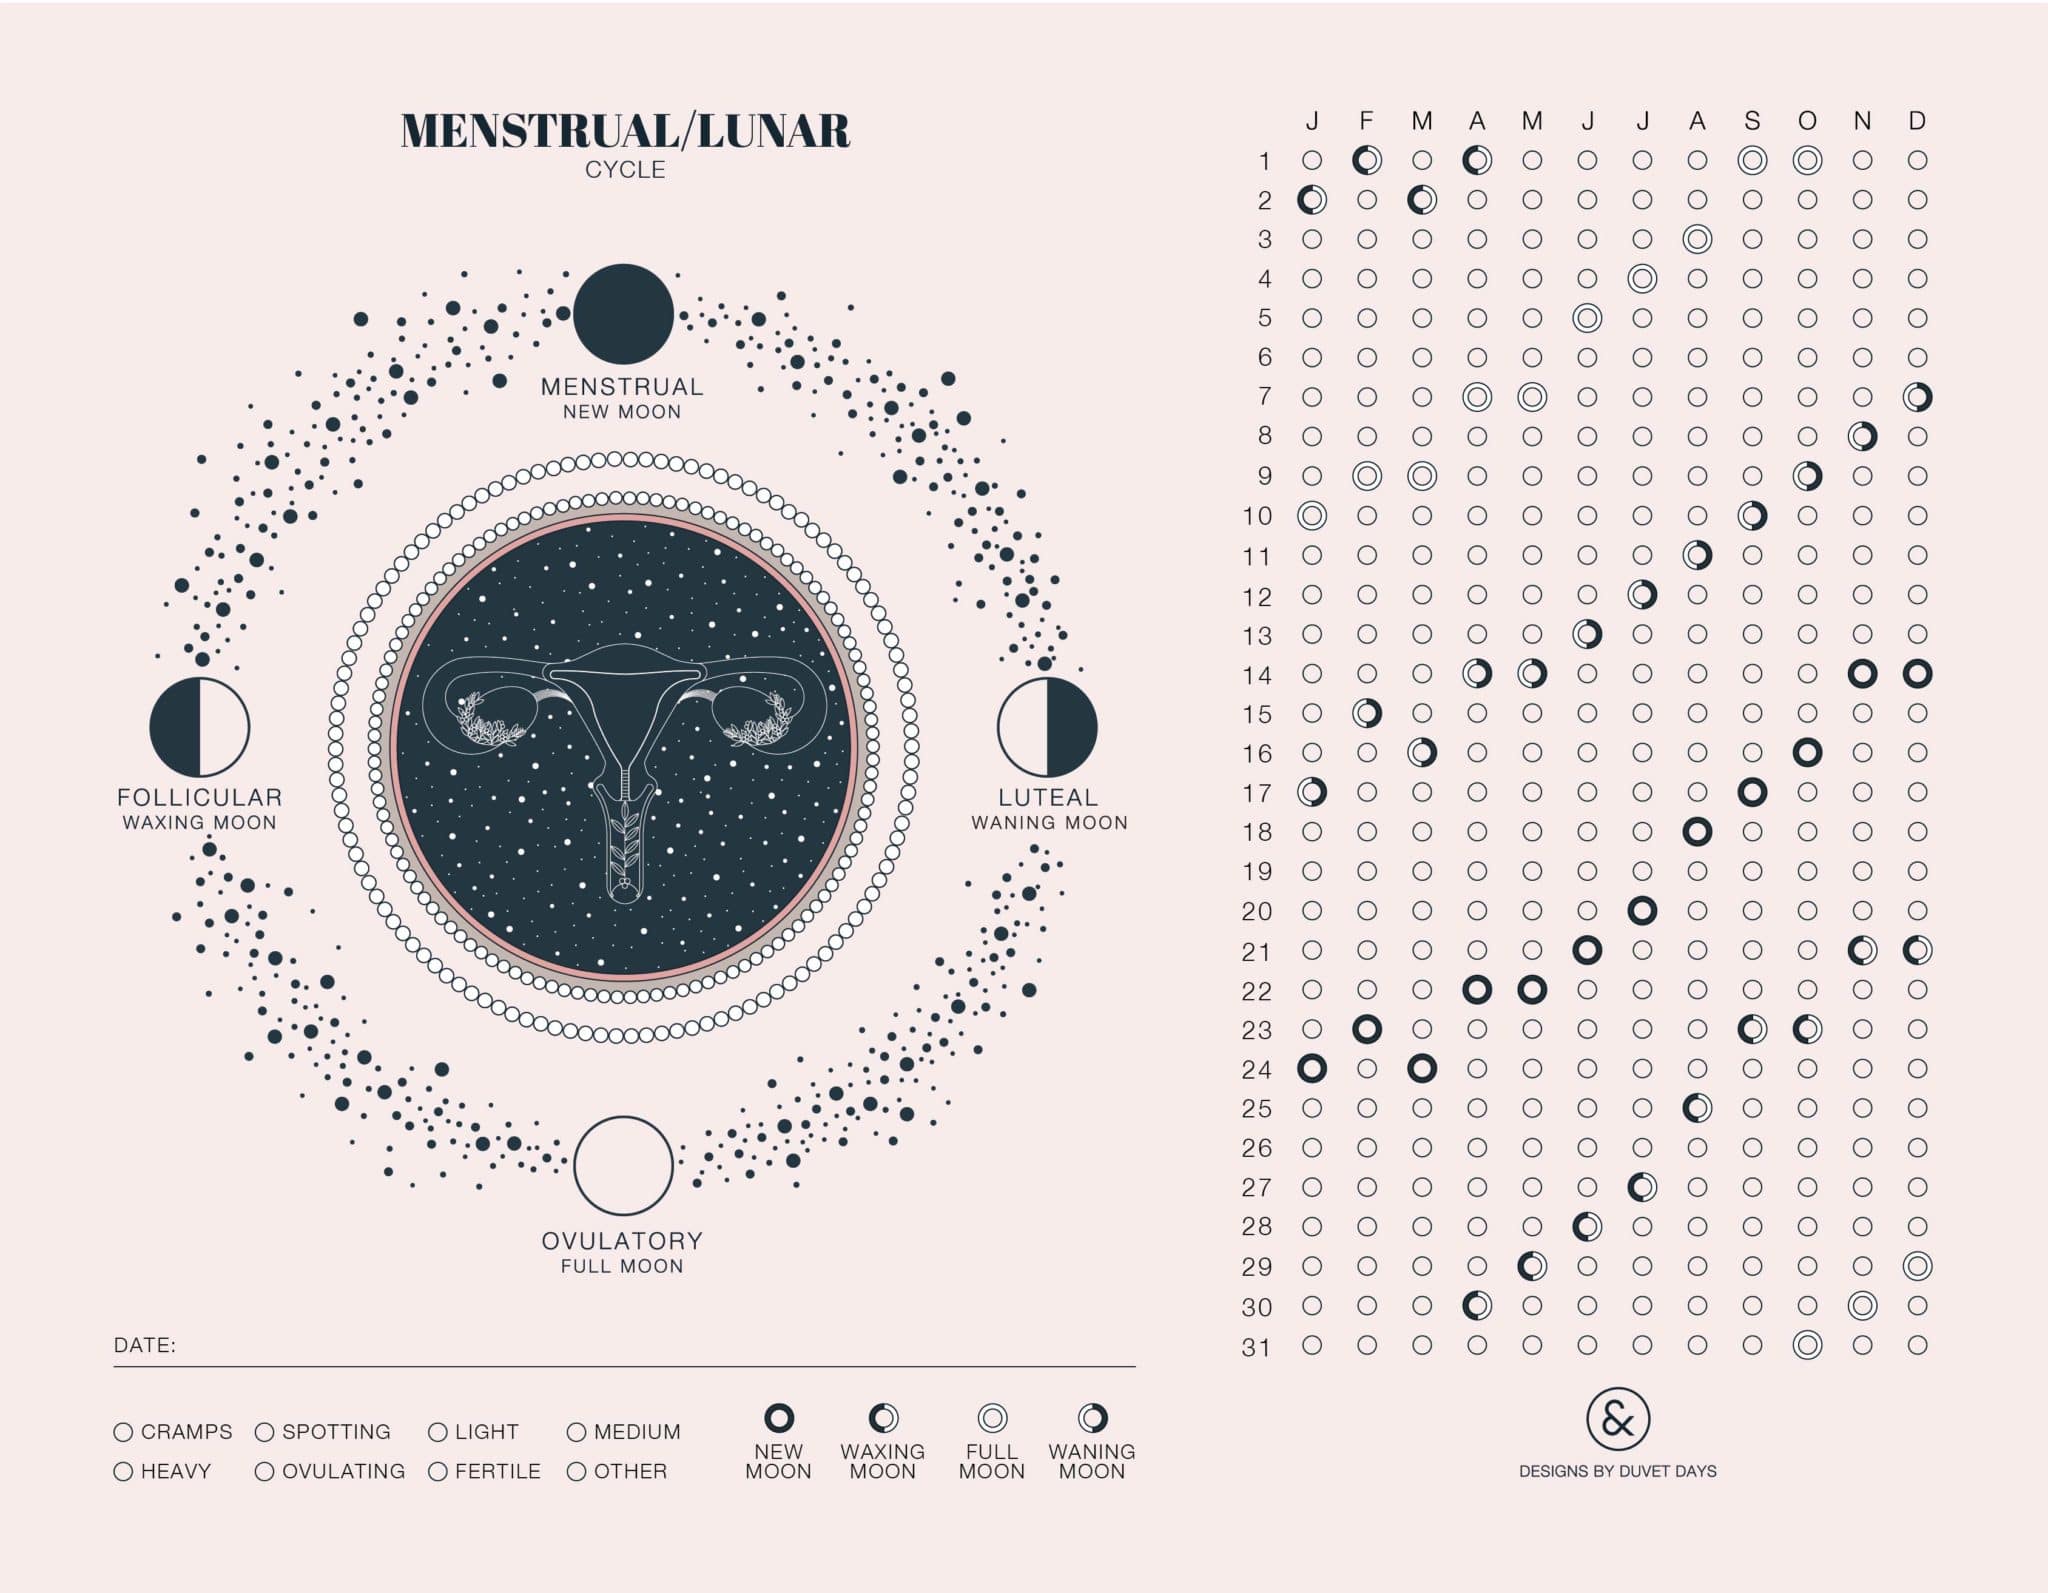 My Menstrual/Lunar Cycle Tracking Sheet 2020 Designs by Duvet Days